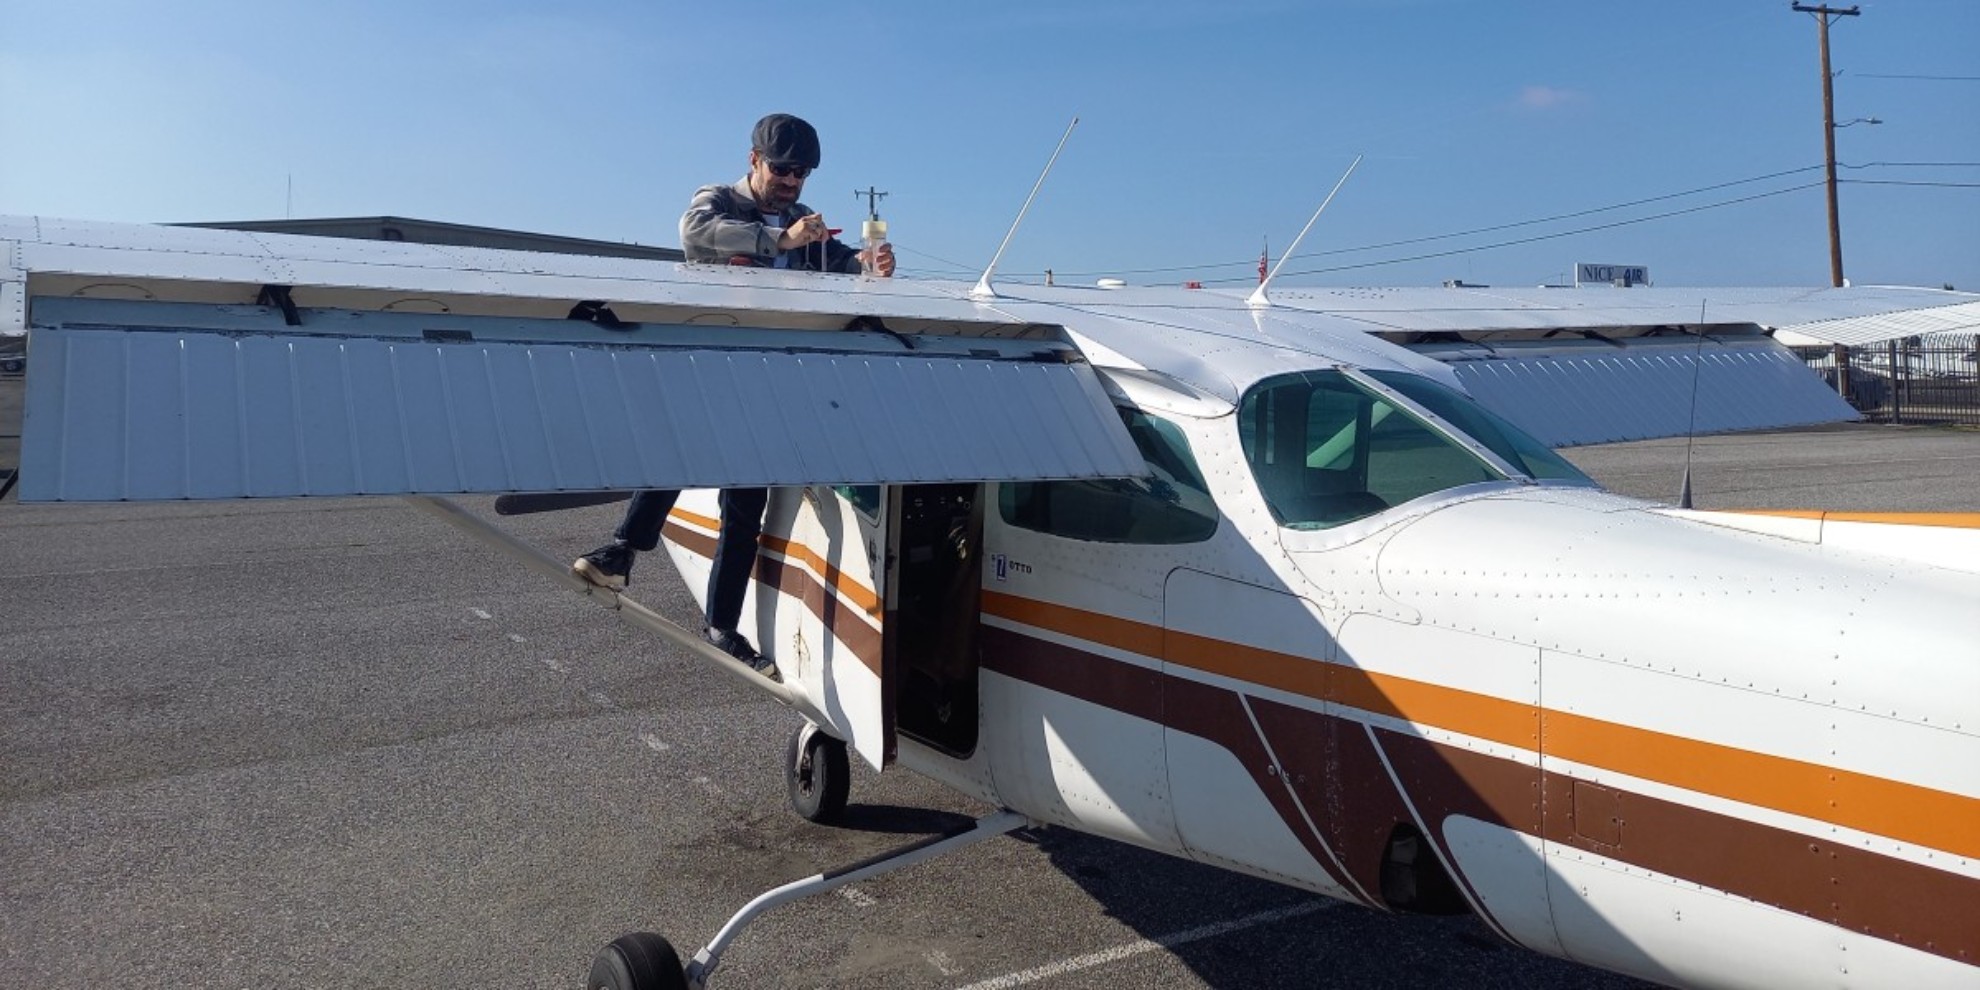 Photo of the author inspecting a small plane prior to flight